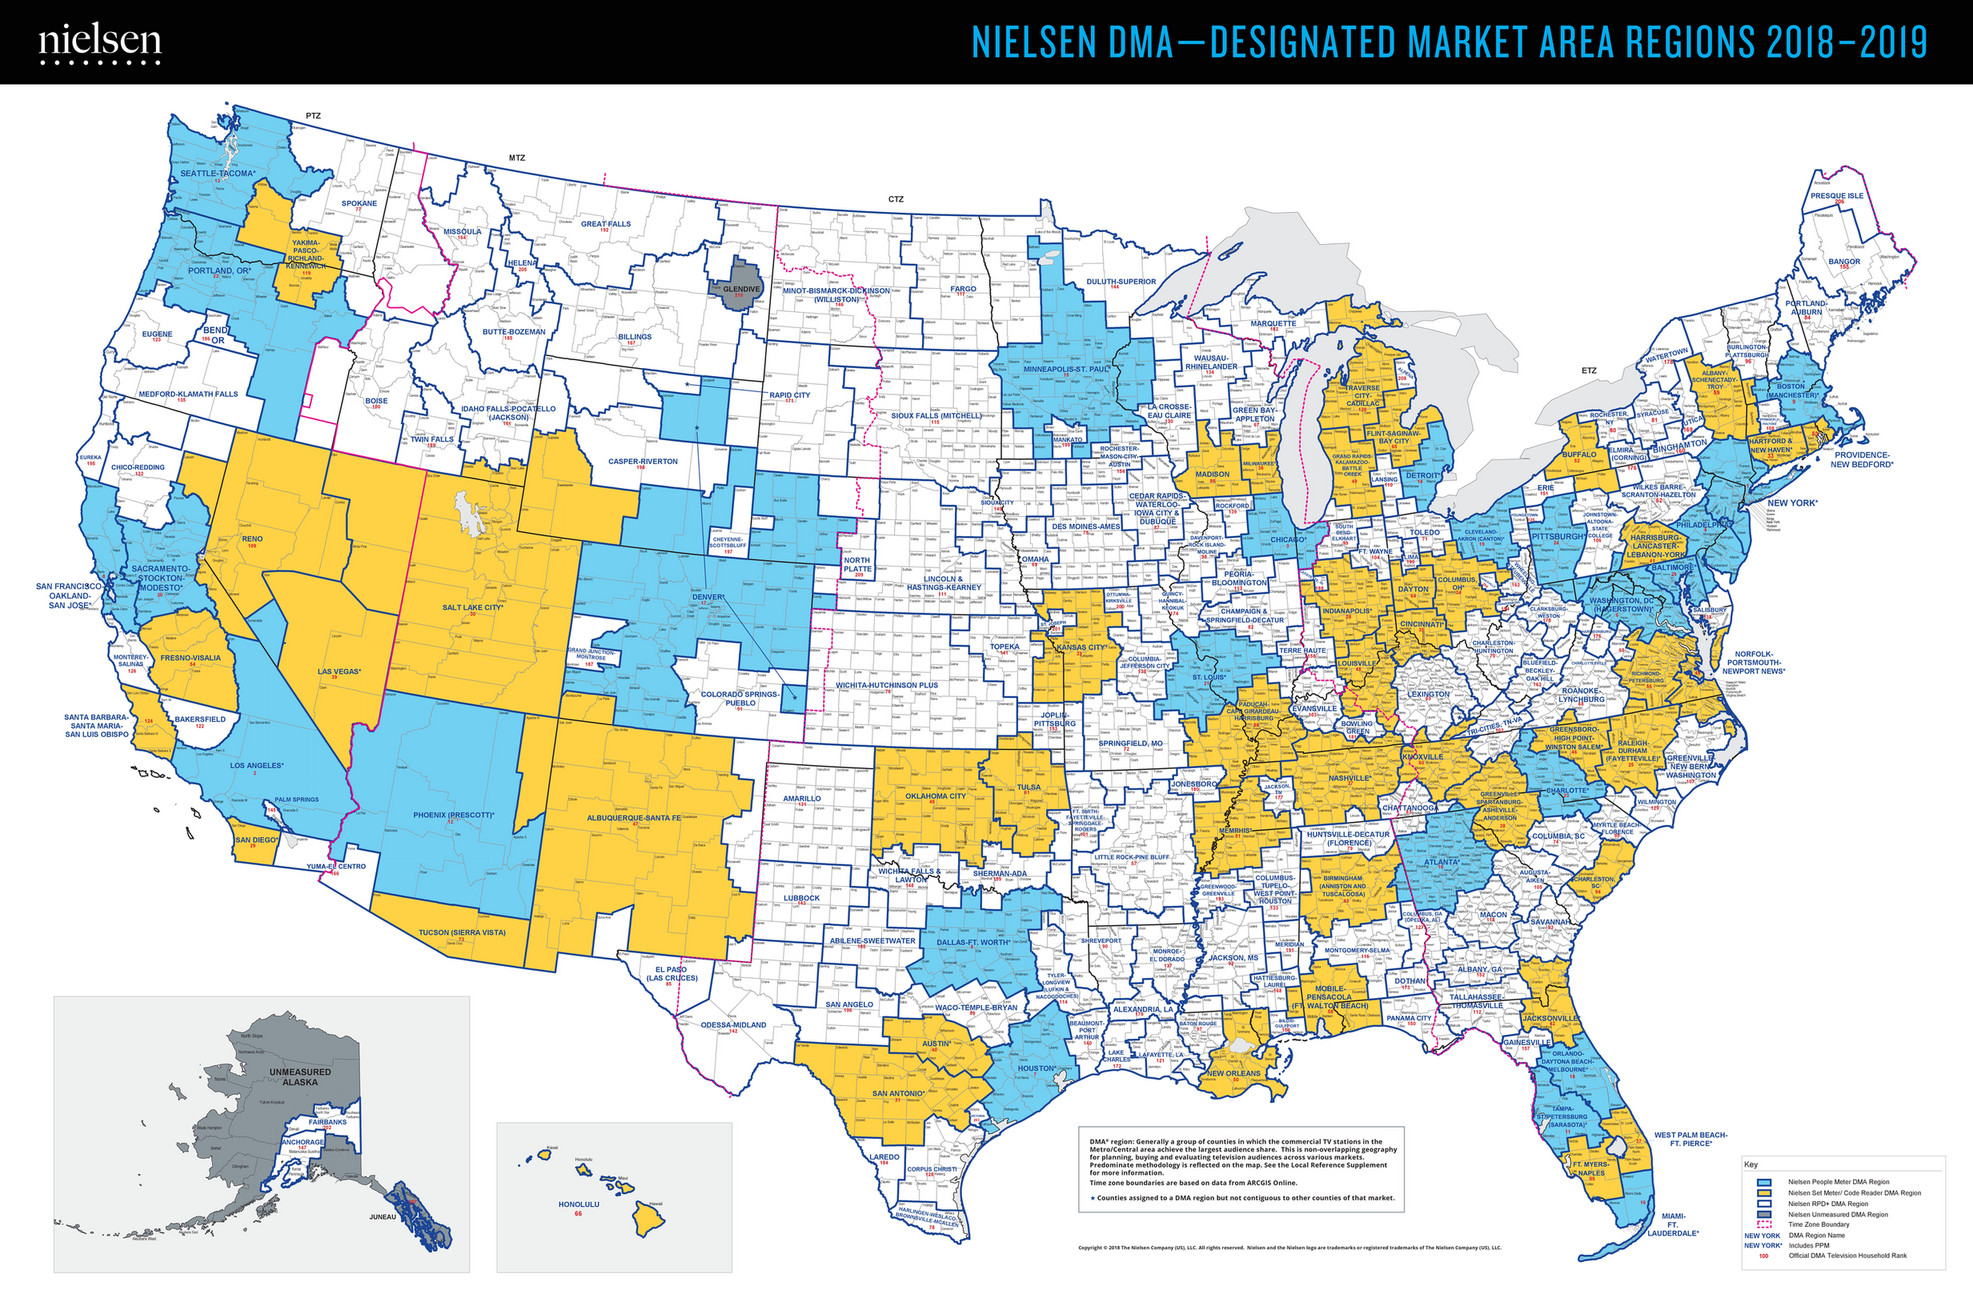 2du Nielsen_DMA_Media_Regions_Map_2019_c Page 1 Created with